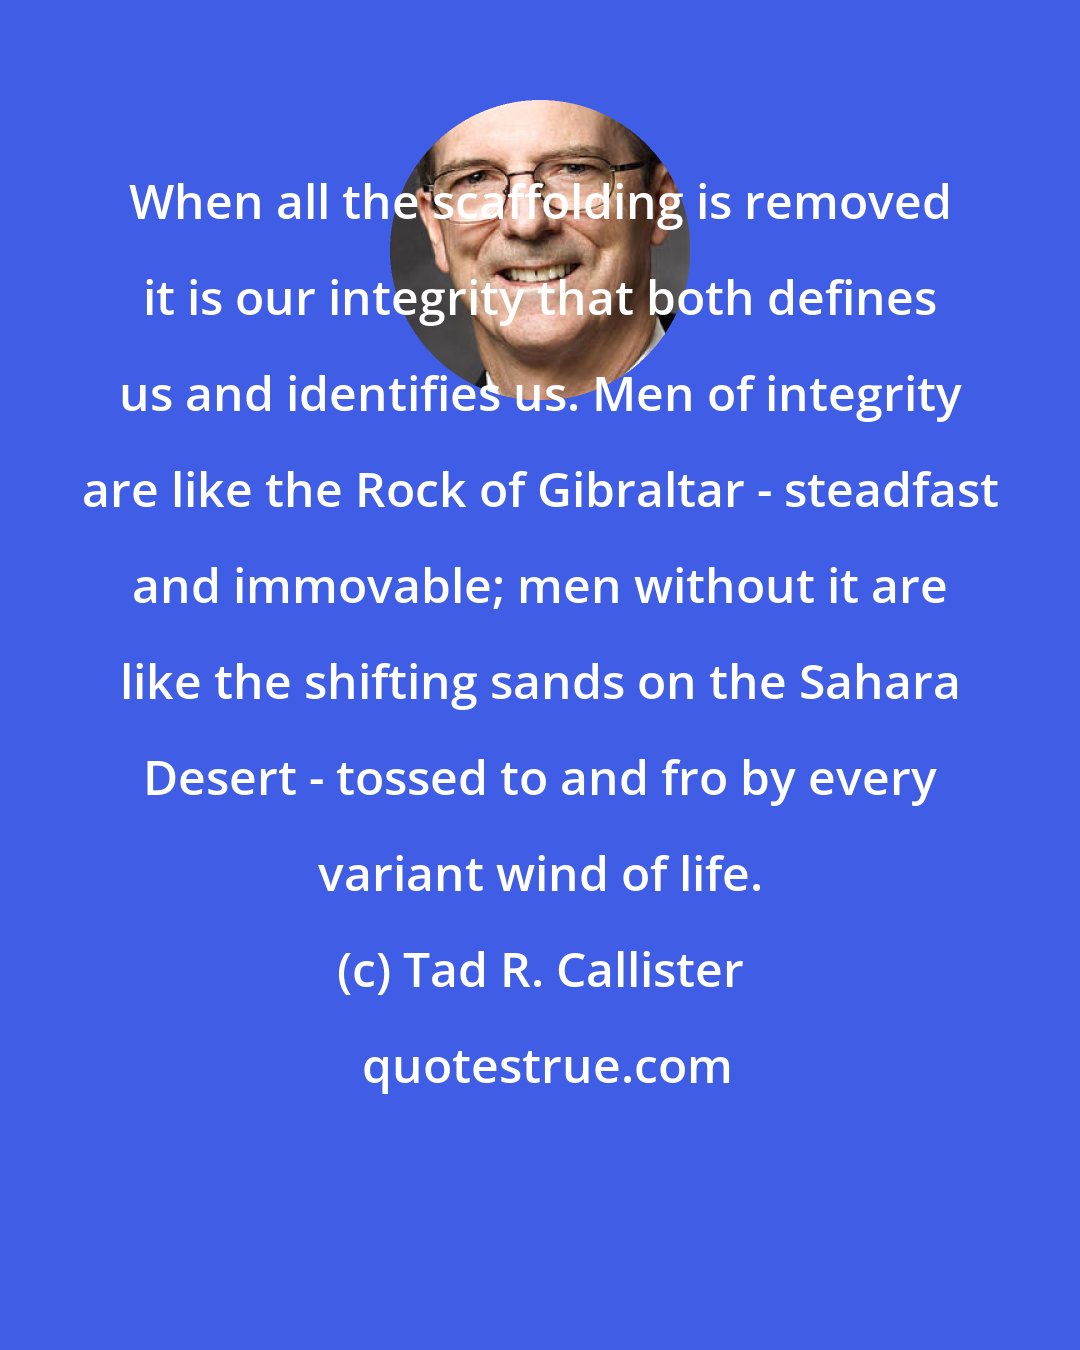 Tad R. Callister: When all the scaffolding is removed it is our integrity that both defines us and identifies us. Men of integrity are like the Rock of Gibraltar - steadfast and immovable; men without it are like the shifting sands on the Sahara Desert - tossed to and fro by every variant wind of life.